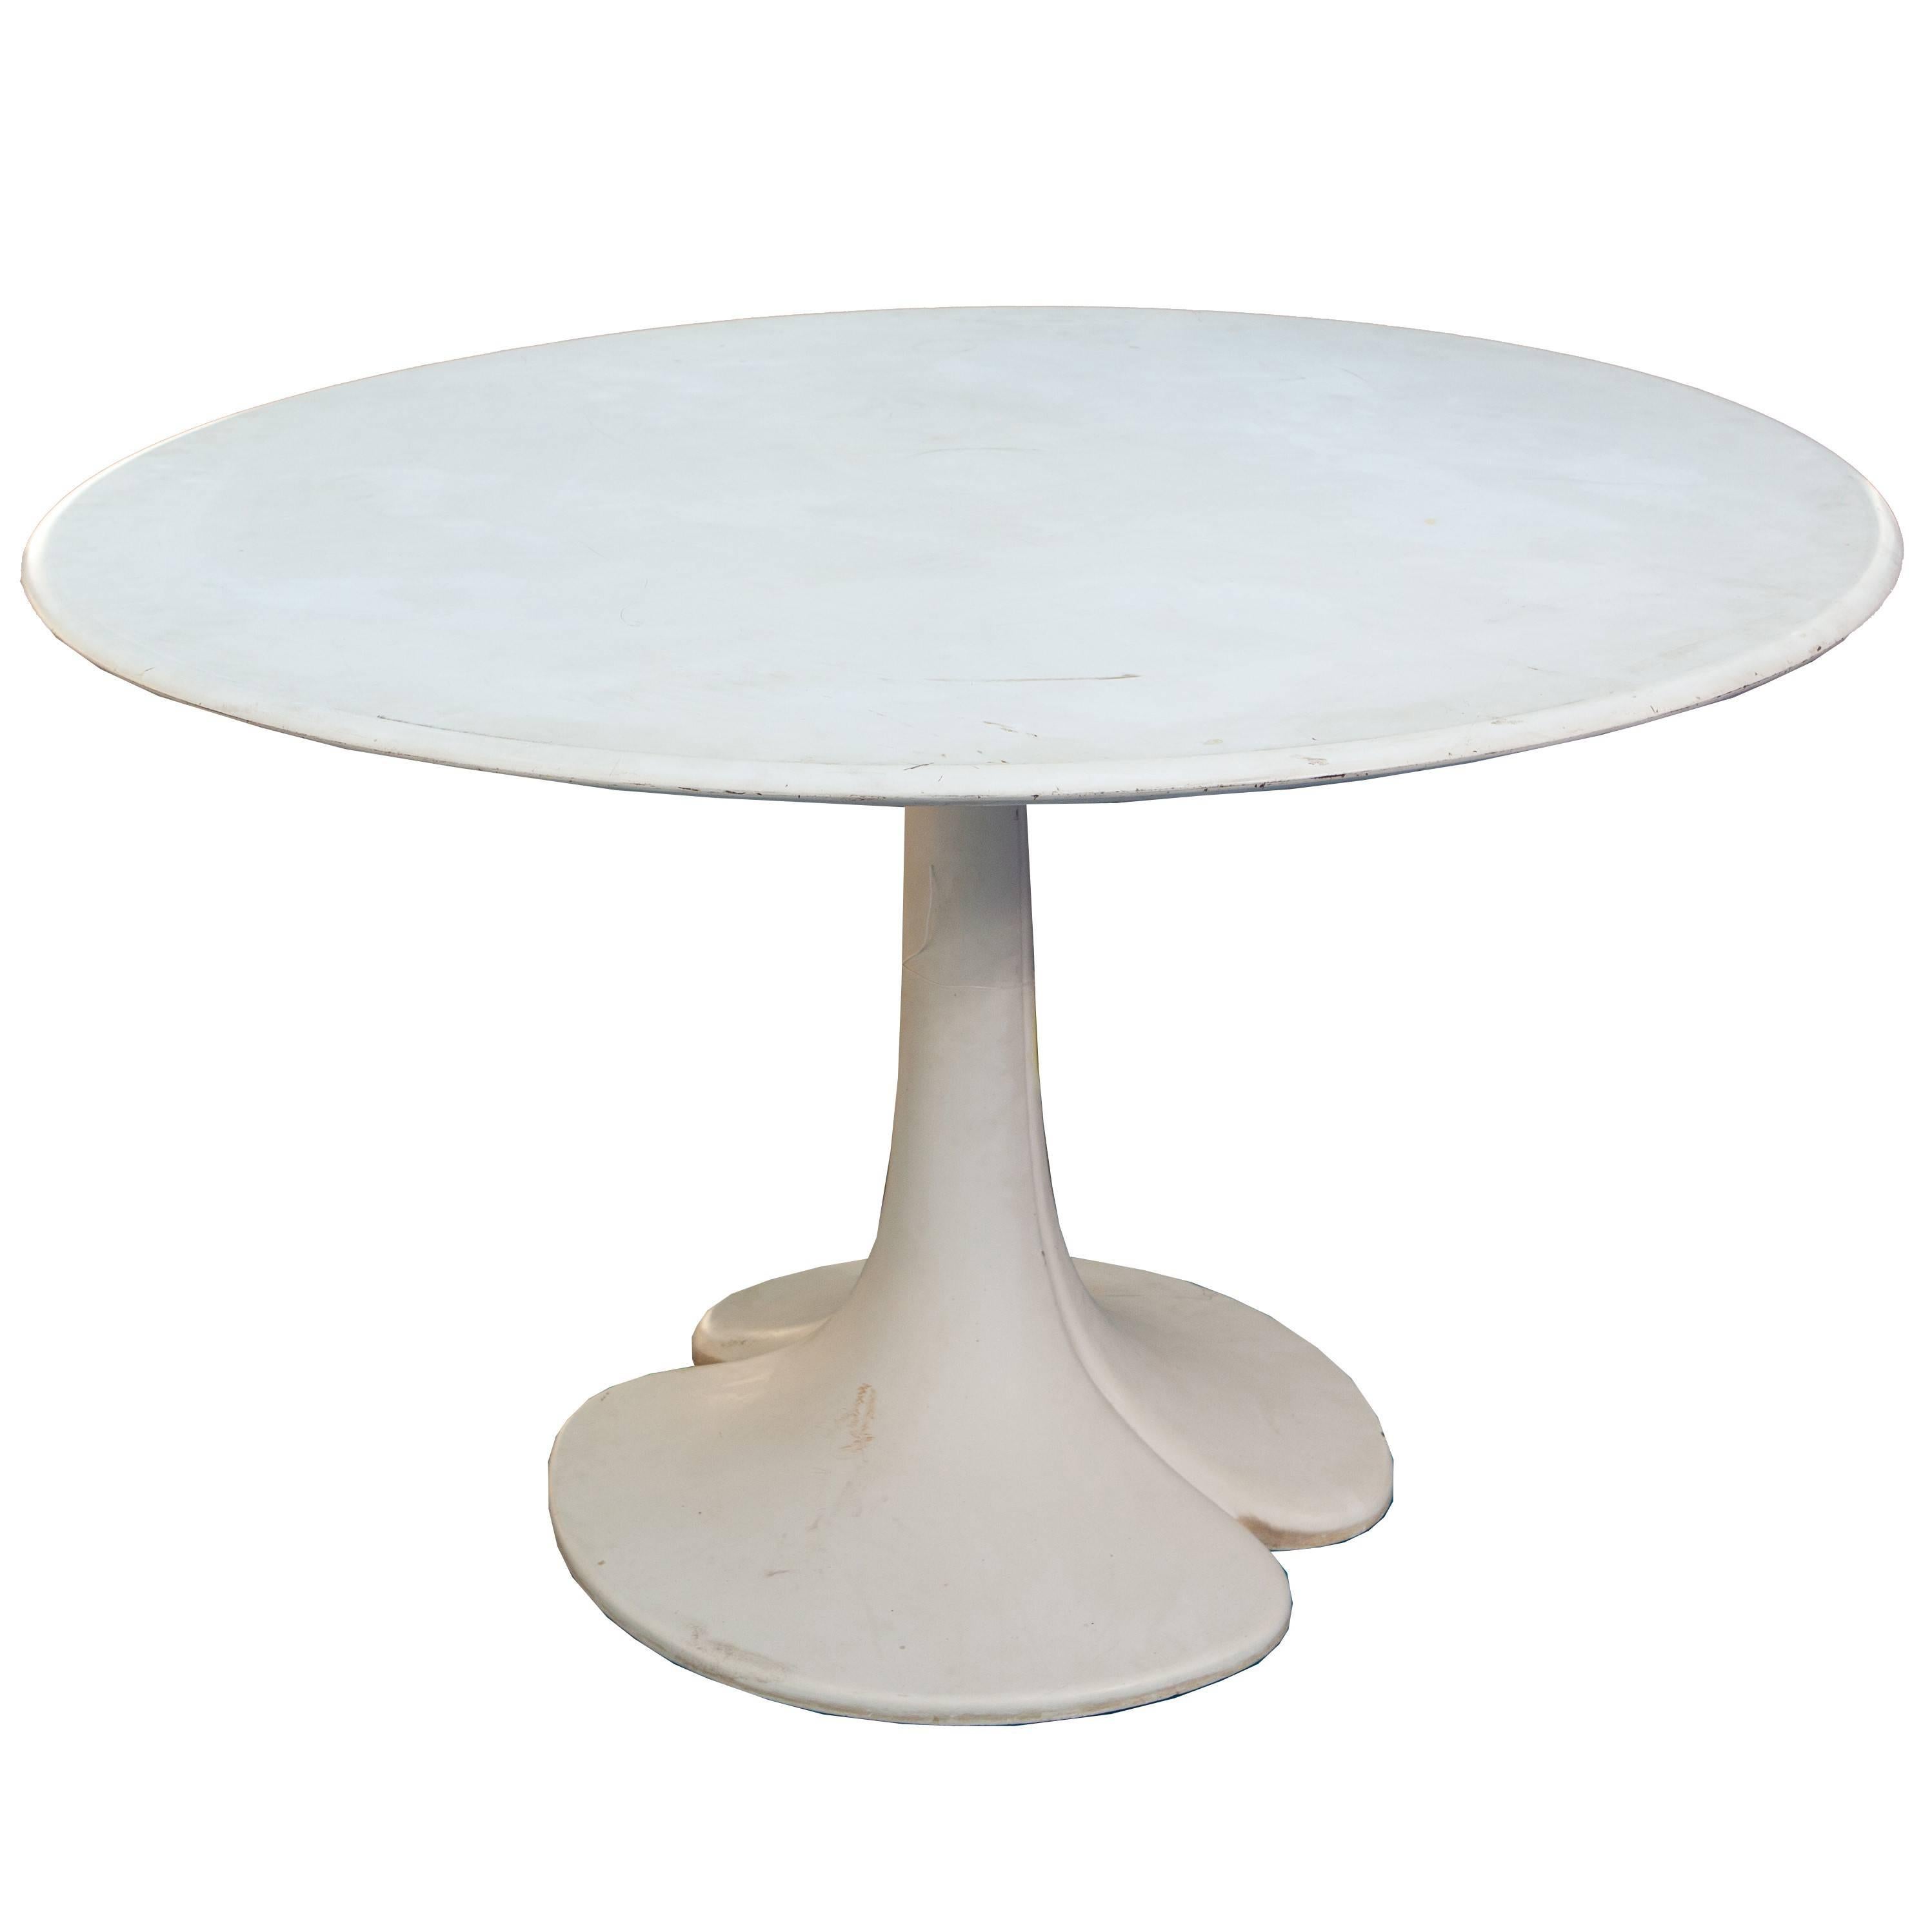 French Tulip Style Dining Table with Round Top and Tapering Pedestal